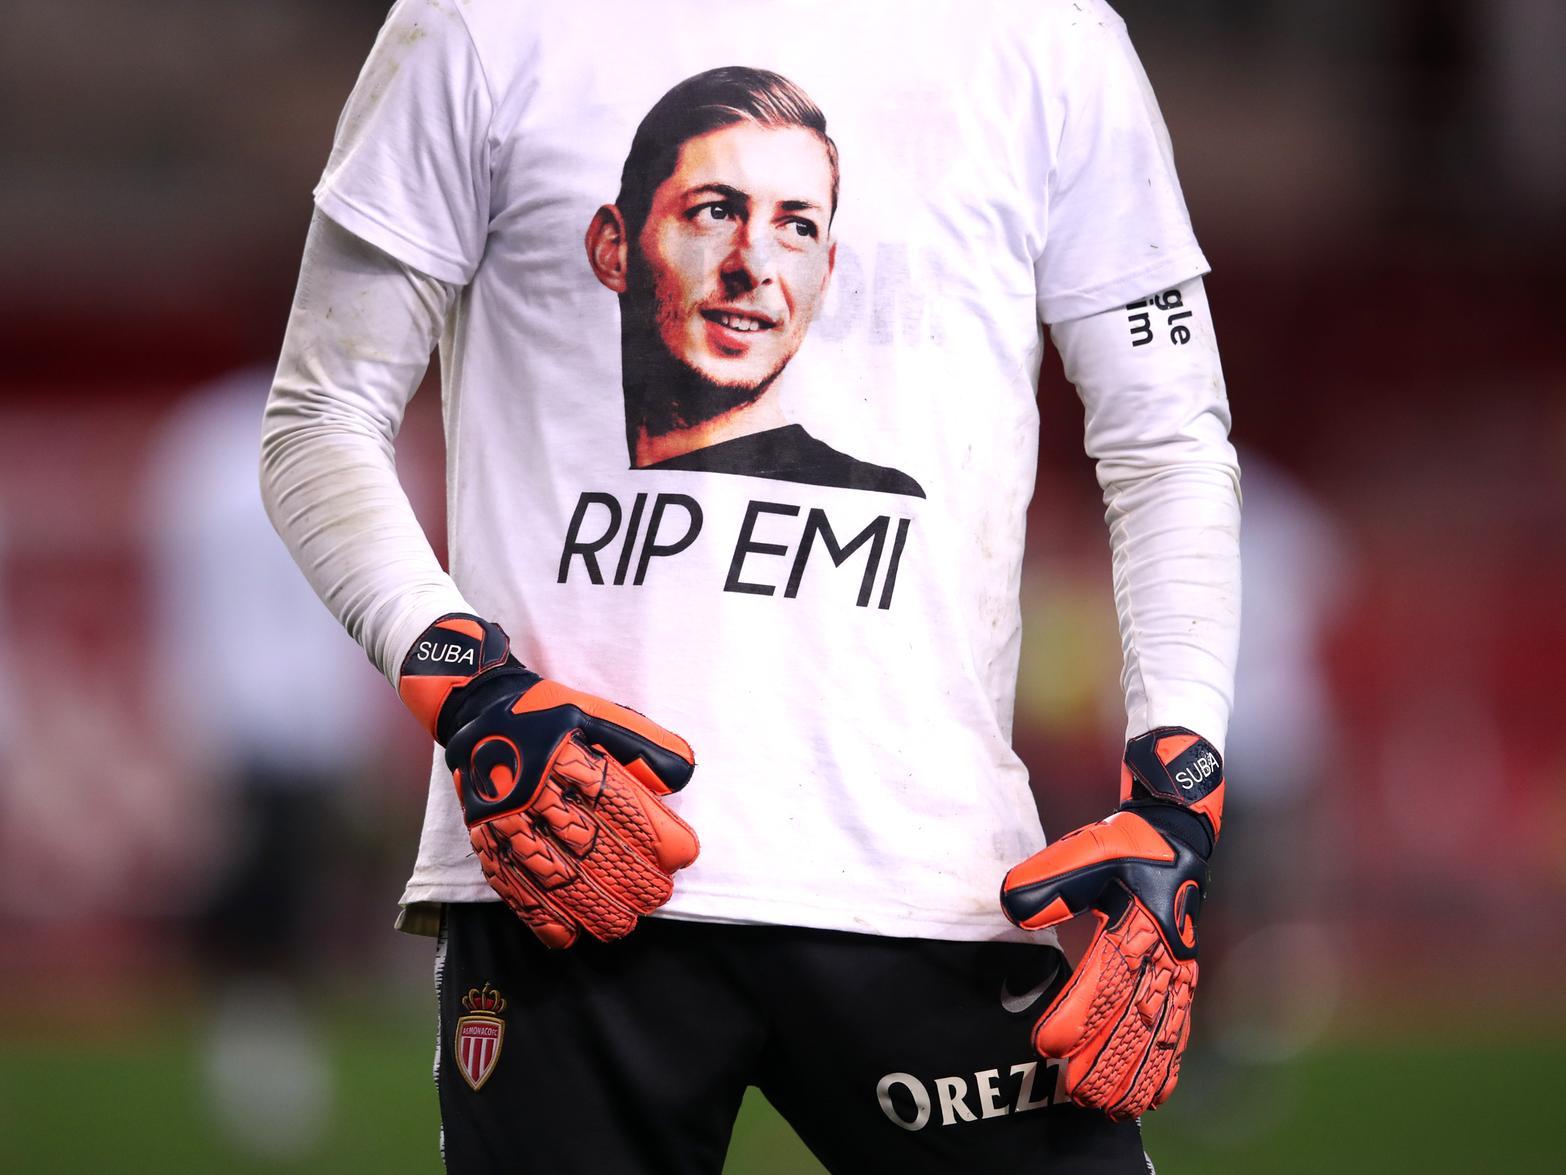 Cardiff City could be banned from taking part in three transfer windows, if they refuse to pay Nantes the first 5.2m installment of the money owed for Emiliano Sala, who tragically died on his way to join the club last January. (Guardian)